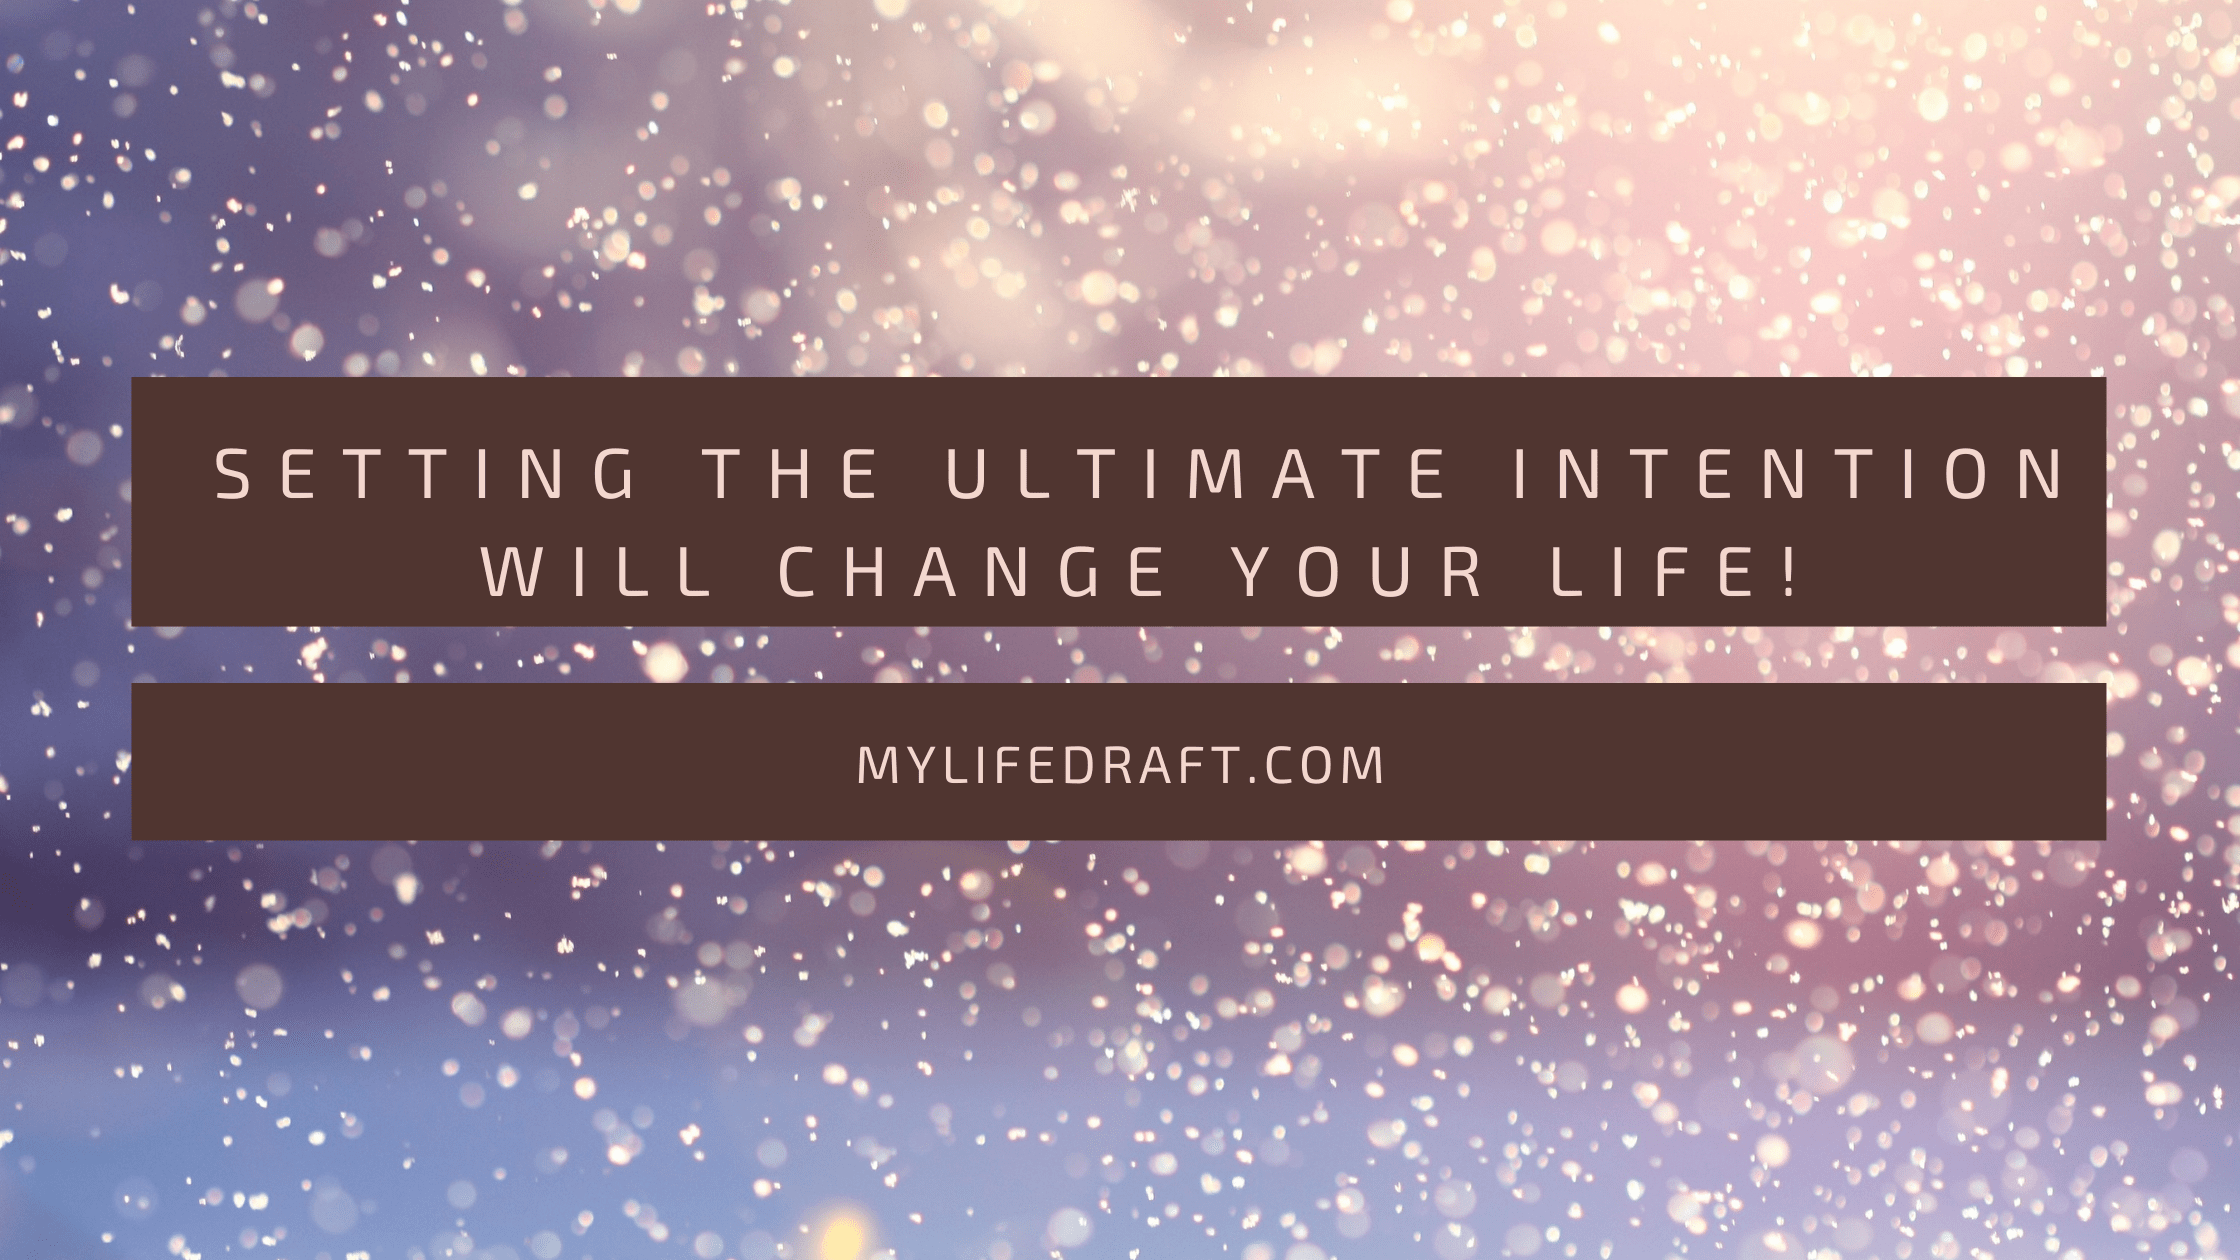 Setting The Ultimate Intention Will Change Your Life!